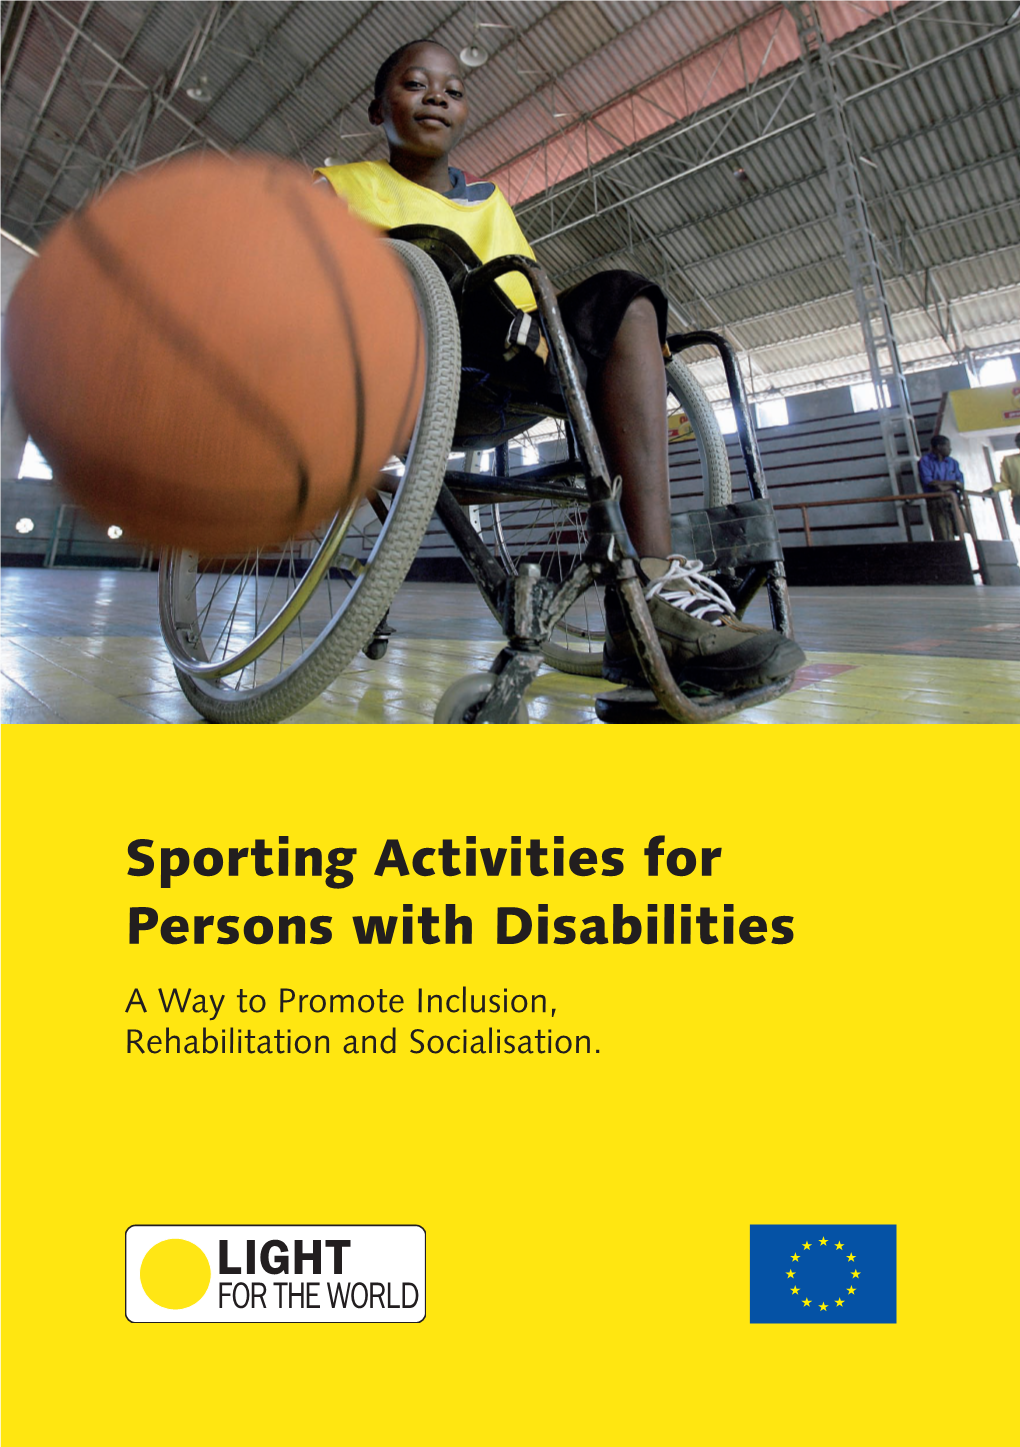 Sporting Activities for Persons with Disabilities a Way to Promote Inclusion, Rehabilitation and Socialisation